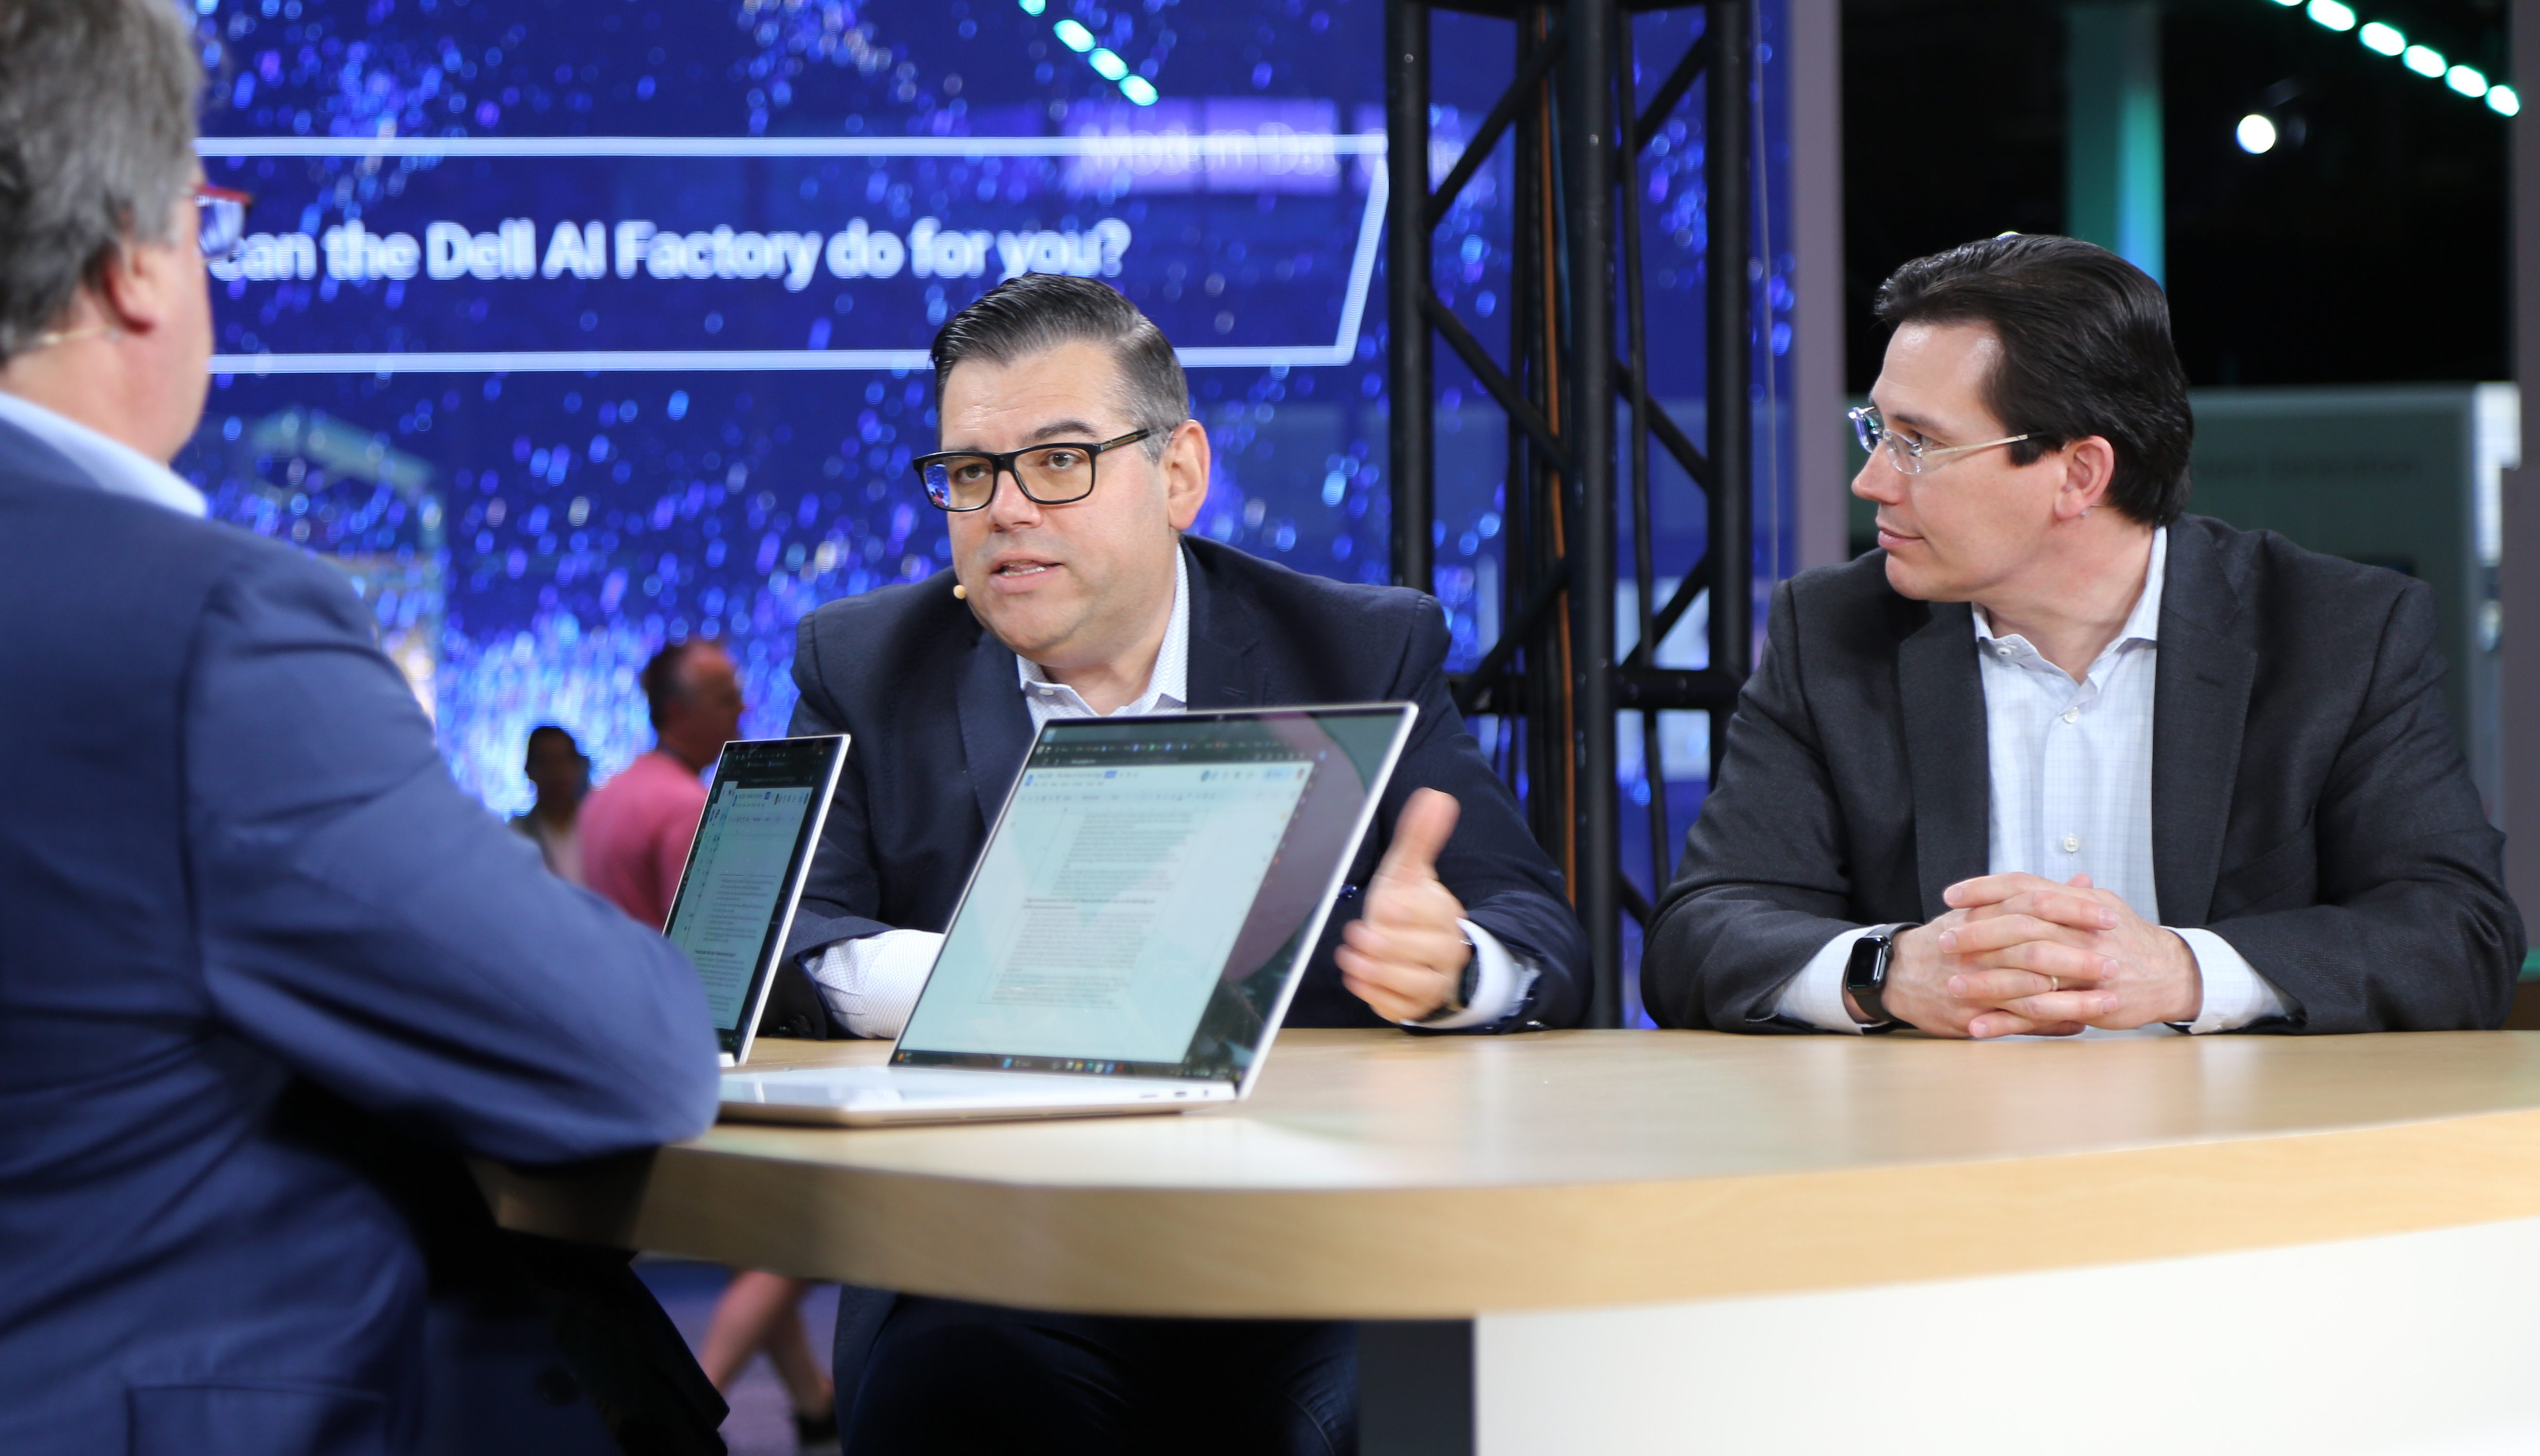 Analyzing the Dell AI Factory and how it facilitates edge use cases.